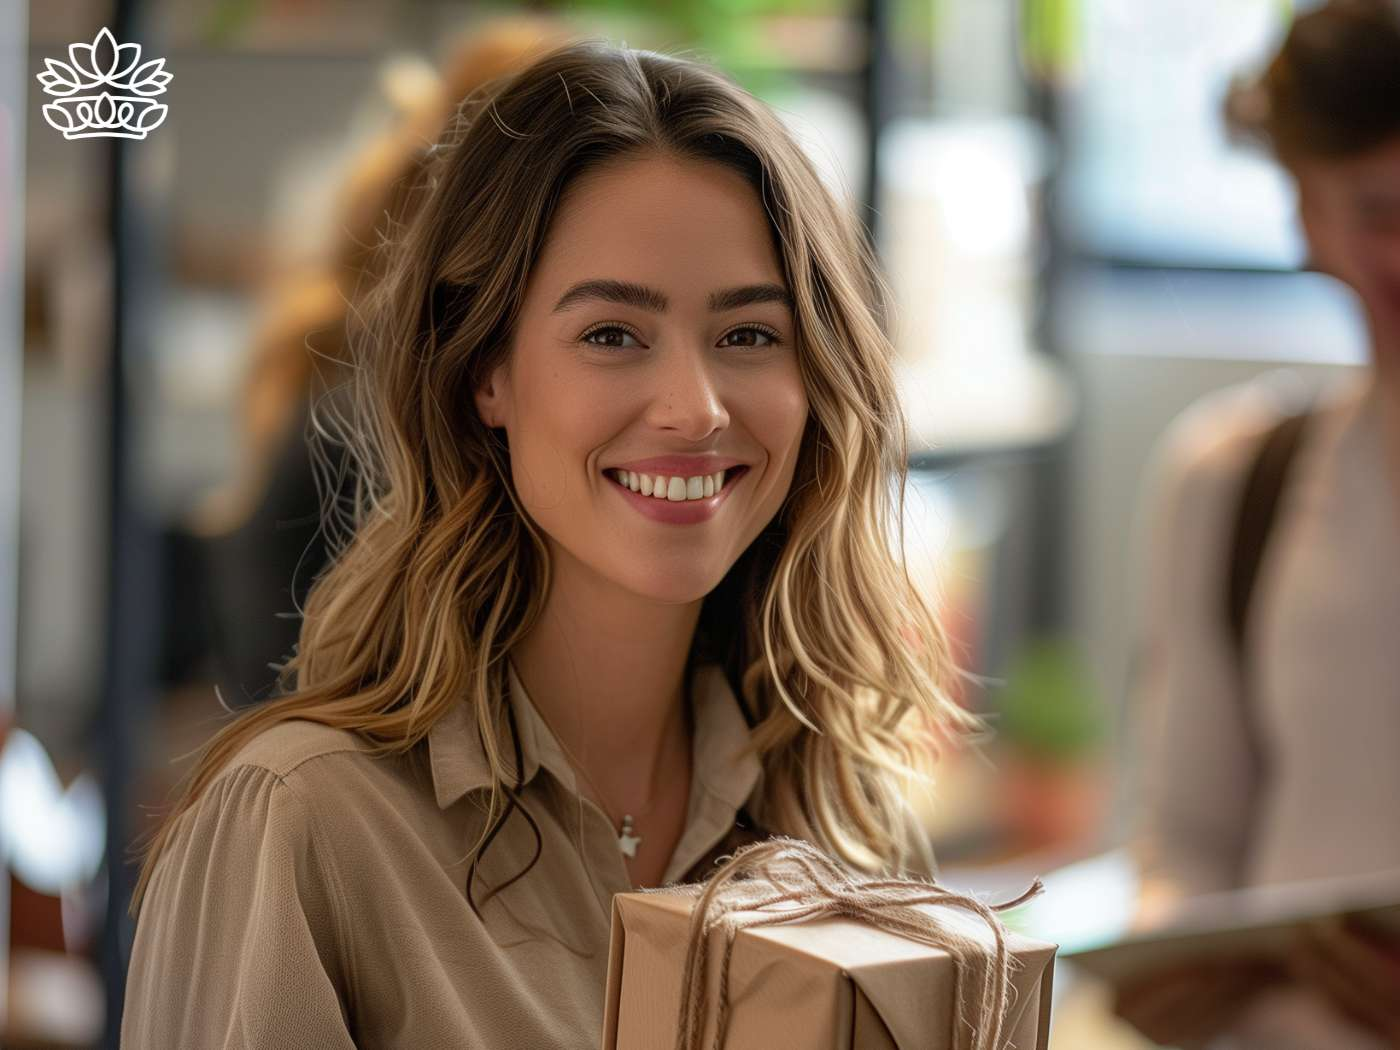 A radiant woman with wavy hair smiling while holding a delicately wrapped gift box, conveying the joy of giving from Fabulous Flowers and Gifts.